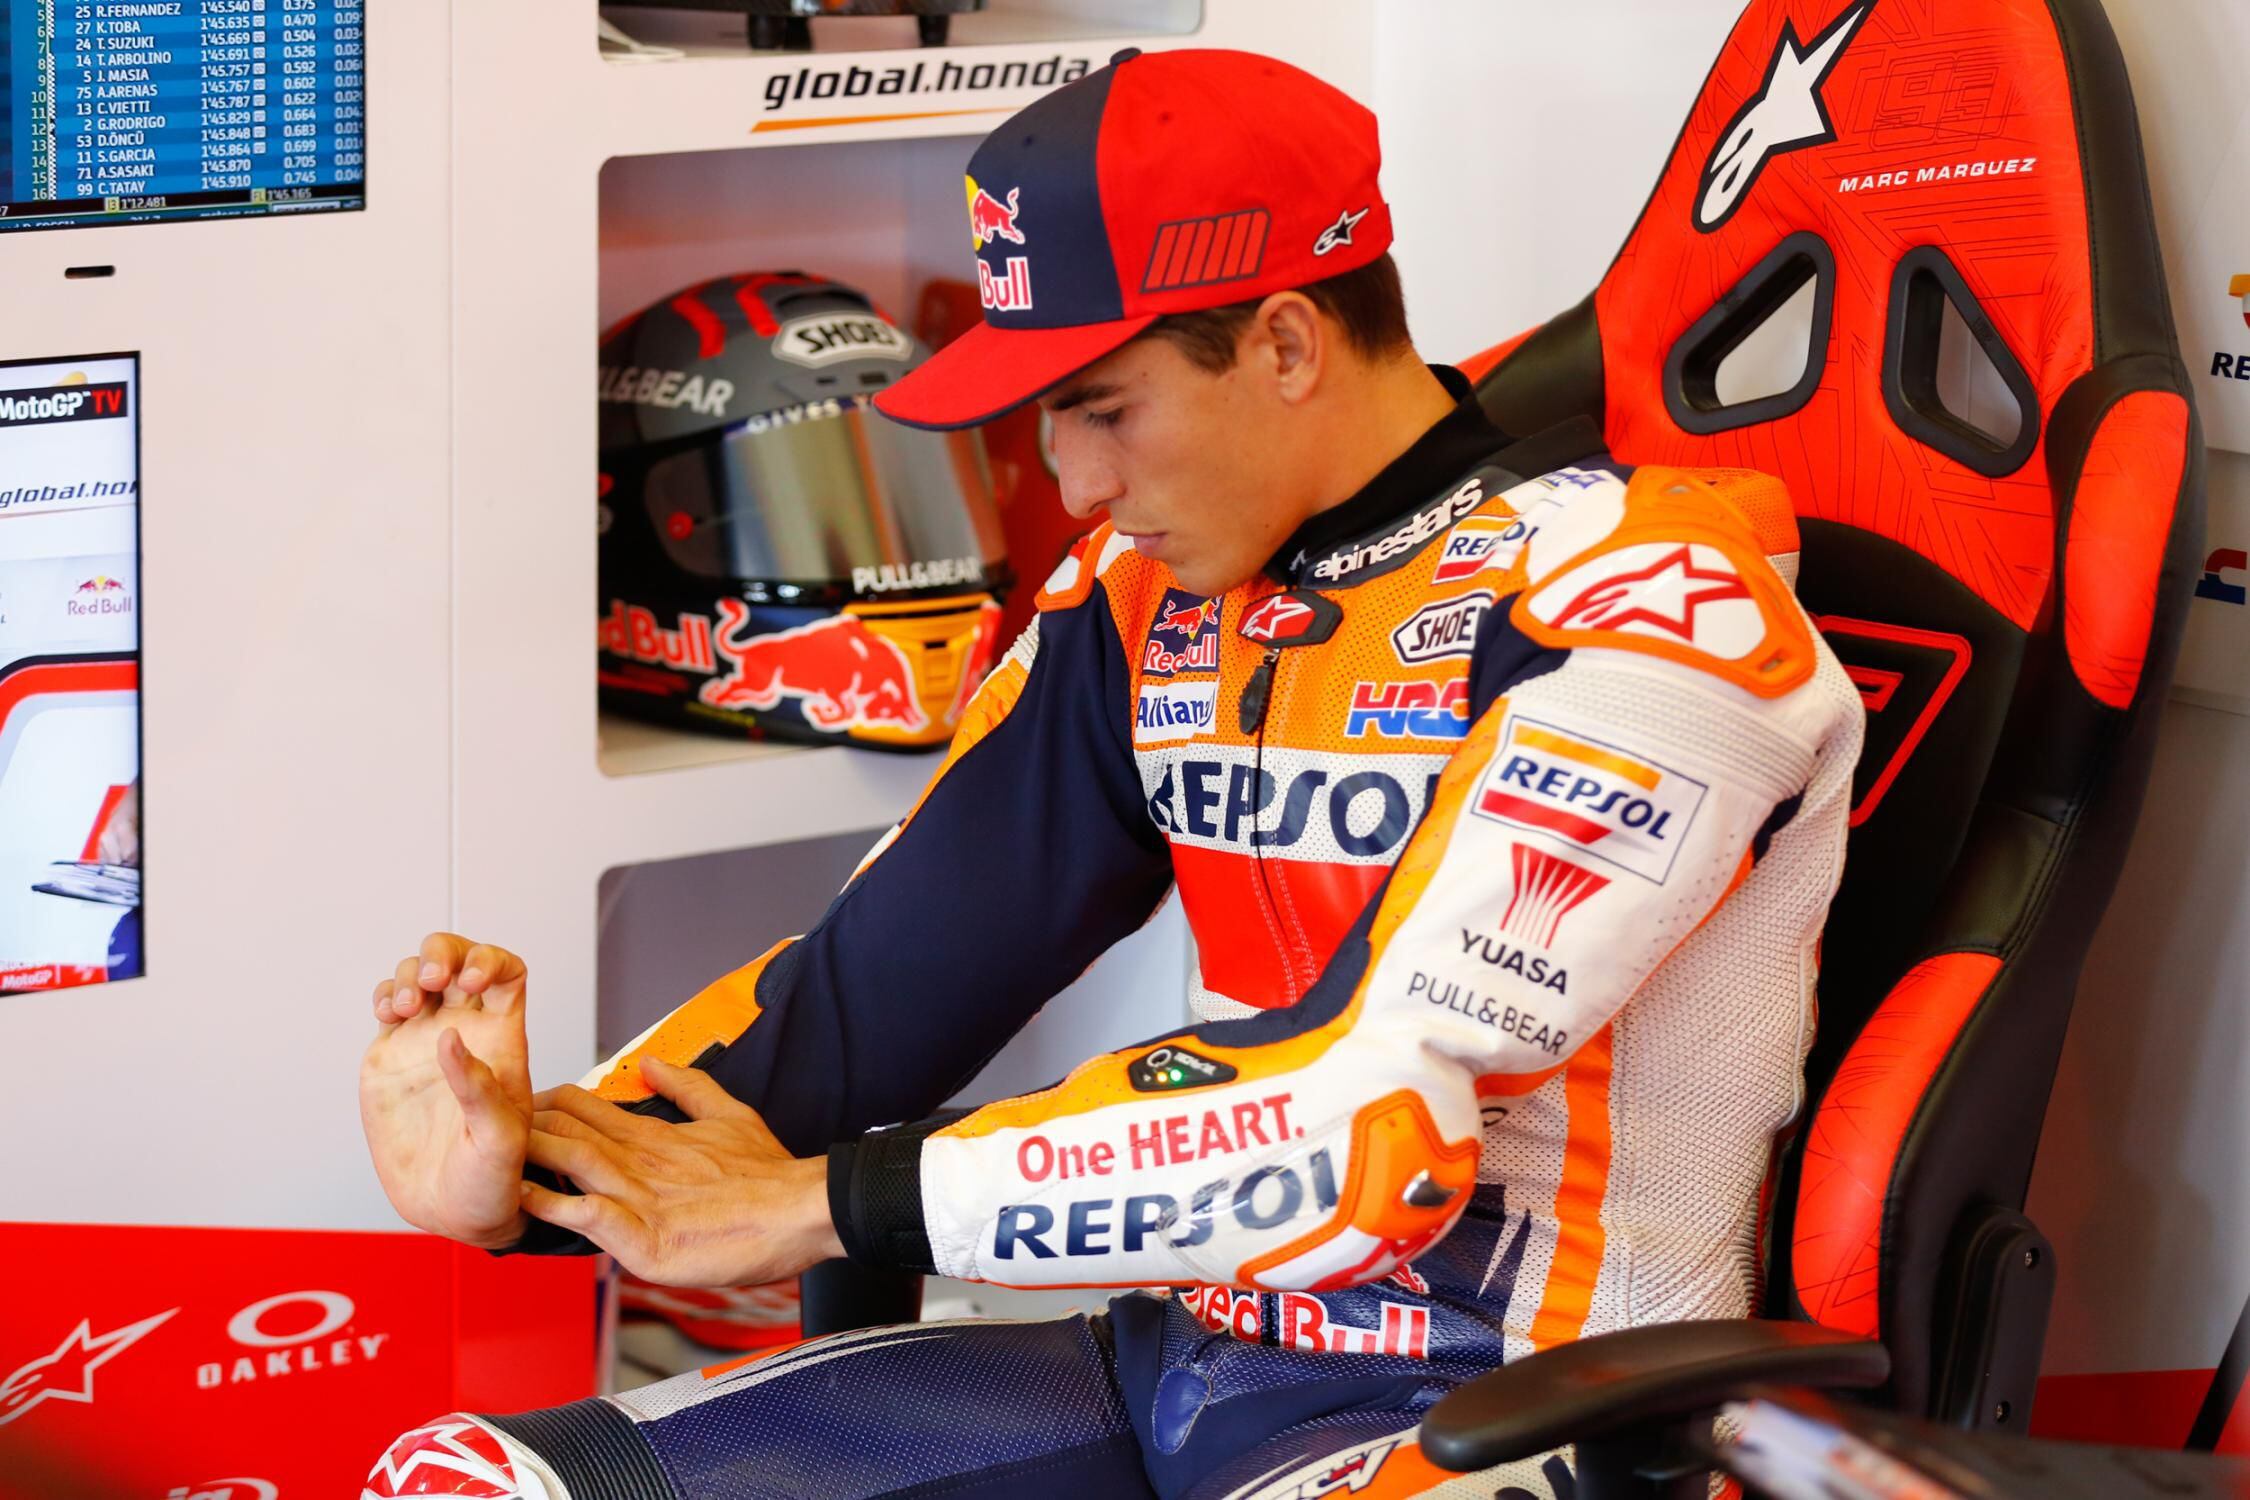 The urge to return to competition cost Márquez his 2020 season, winter testing, and the beginning of the 2021 season.